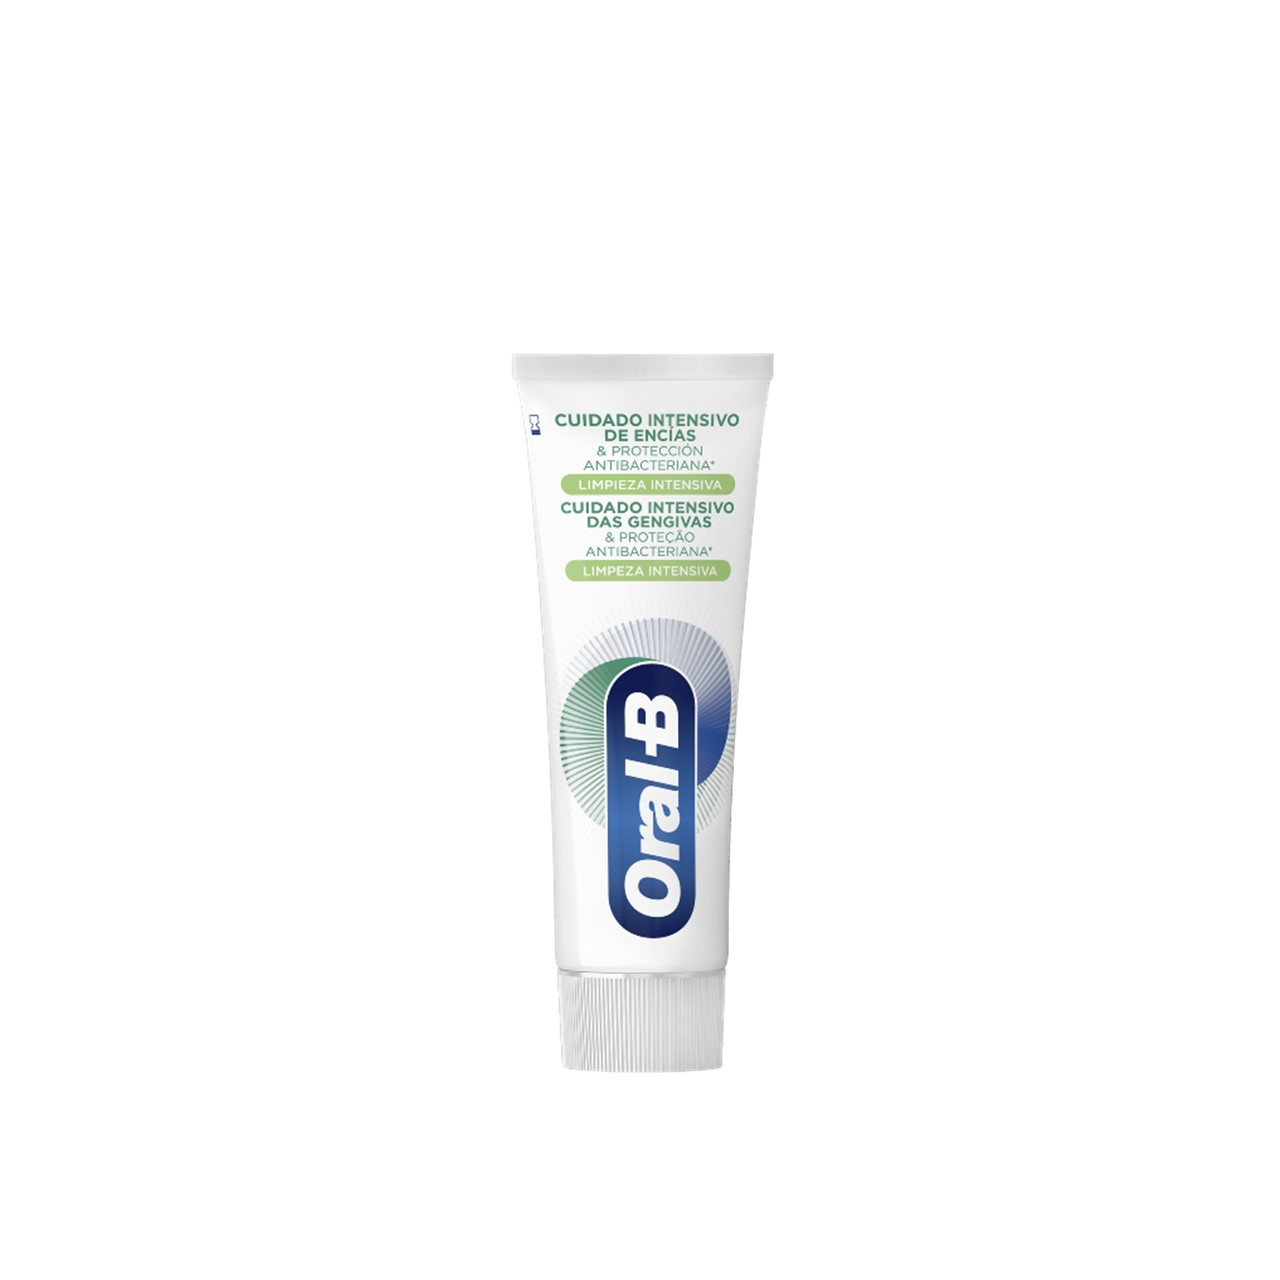 Oral-B Gum Care & Antibacterial Intensive Cleaning Toothpaste 75ml (2.5 fl oz)